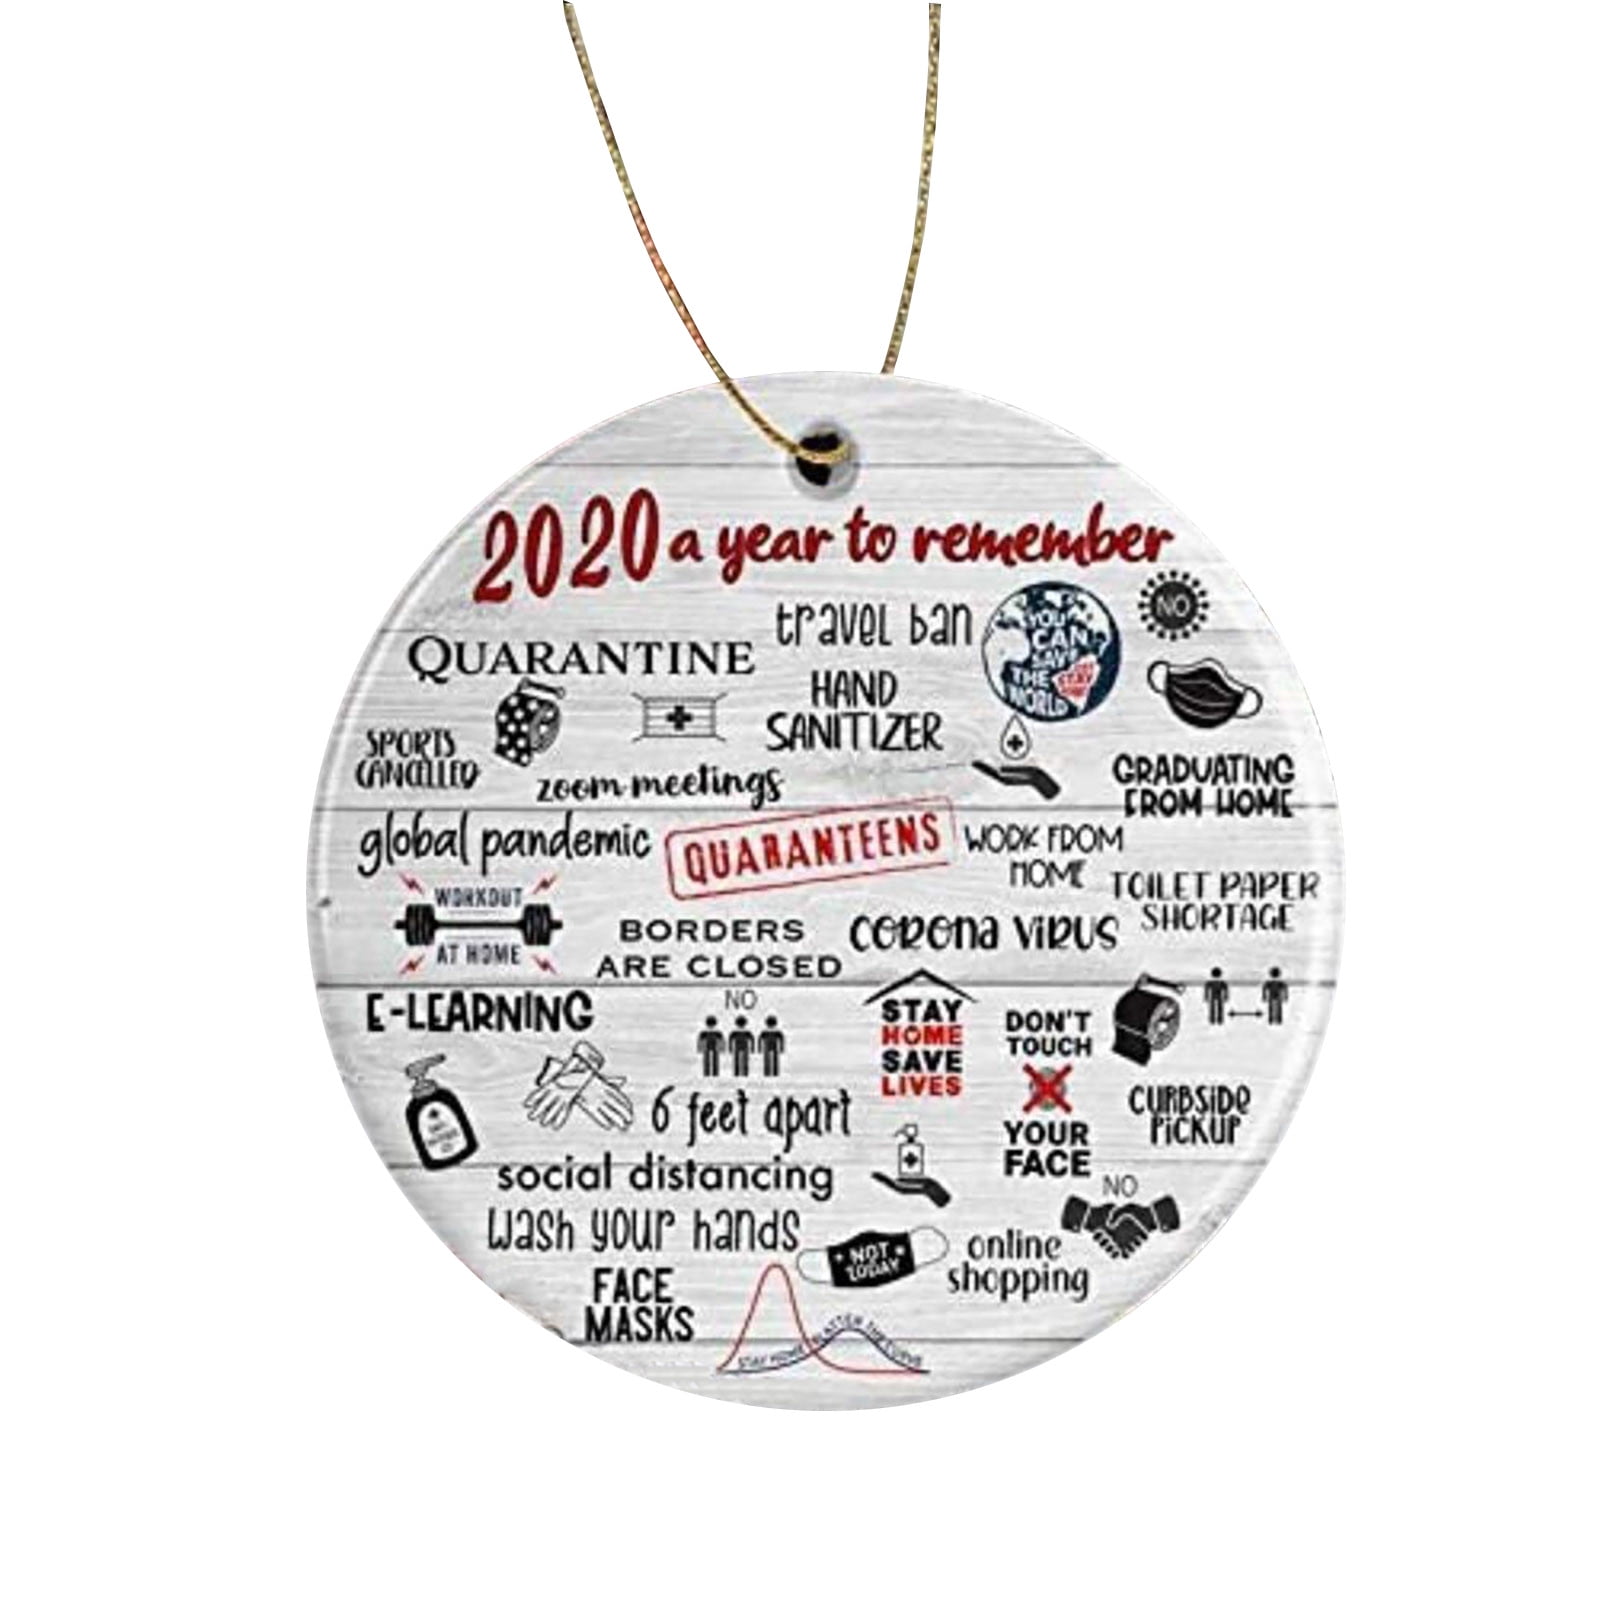 Details about  / Mini Face Mask Christmas Tree Holiday Pandemic Ornament 2020 Pick Your Design